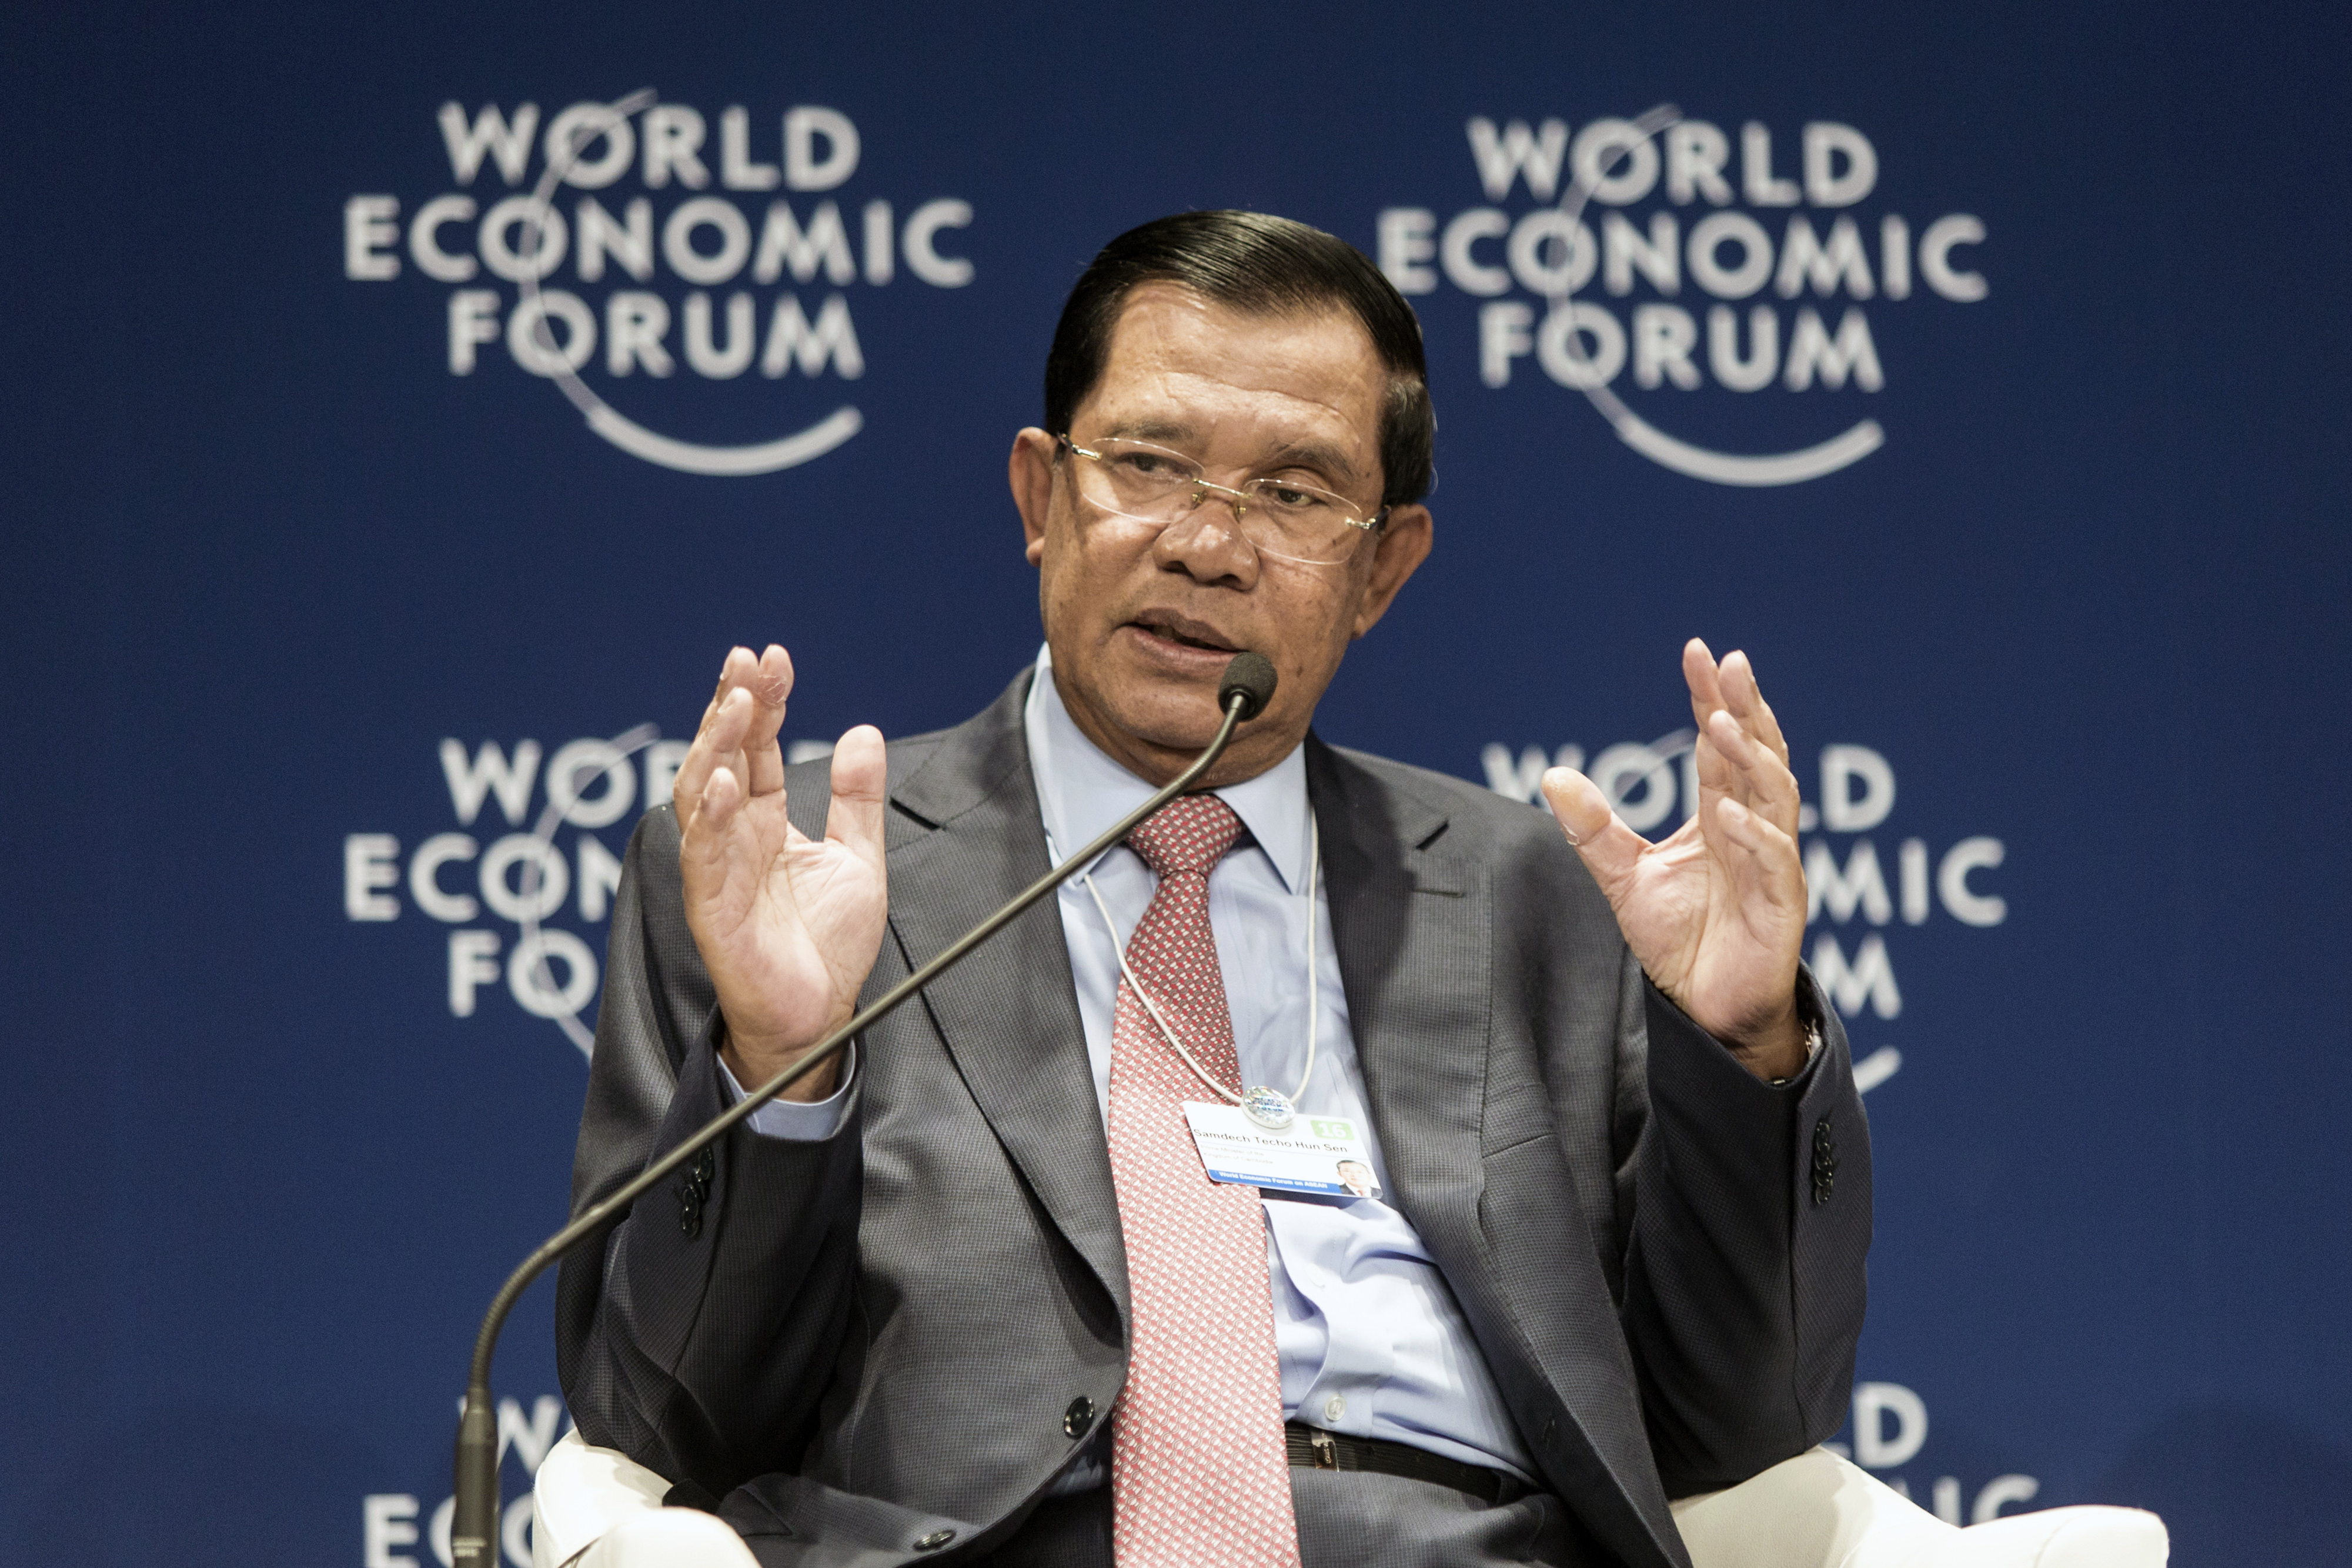 Hun Sen, Cambodia's prime minister, during the World Economic Forum in Kuala Lumpur, Malaysia, on June 1, 2016. (Charles Pertwee—Bloomberg/Getty Images)